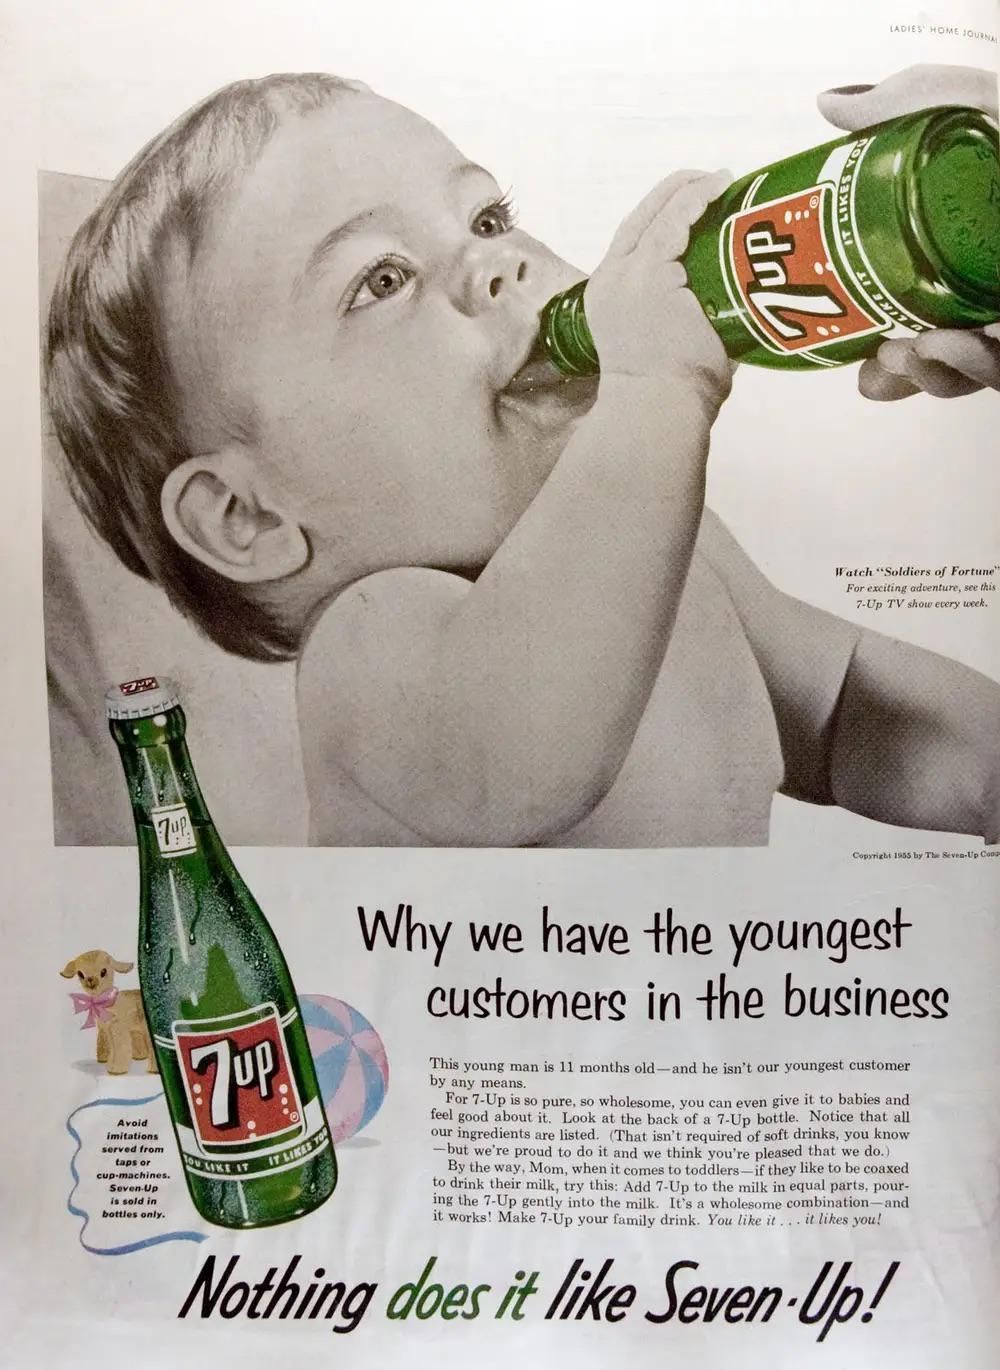 Imagine the uproar this ad would cause today